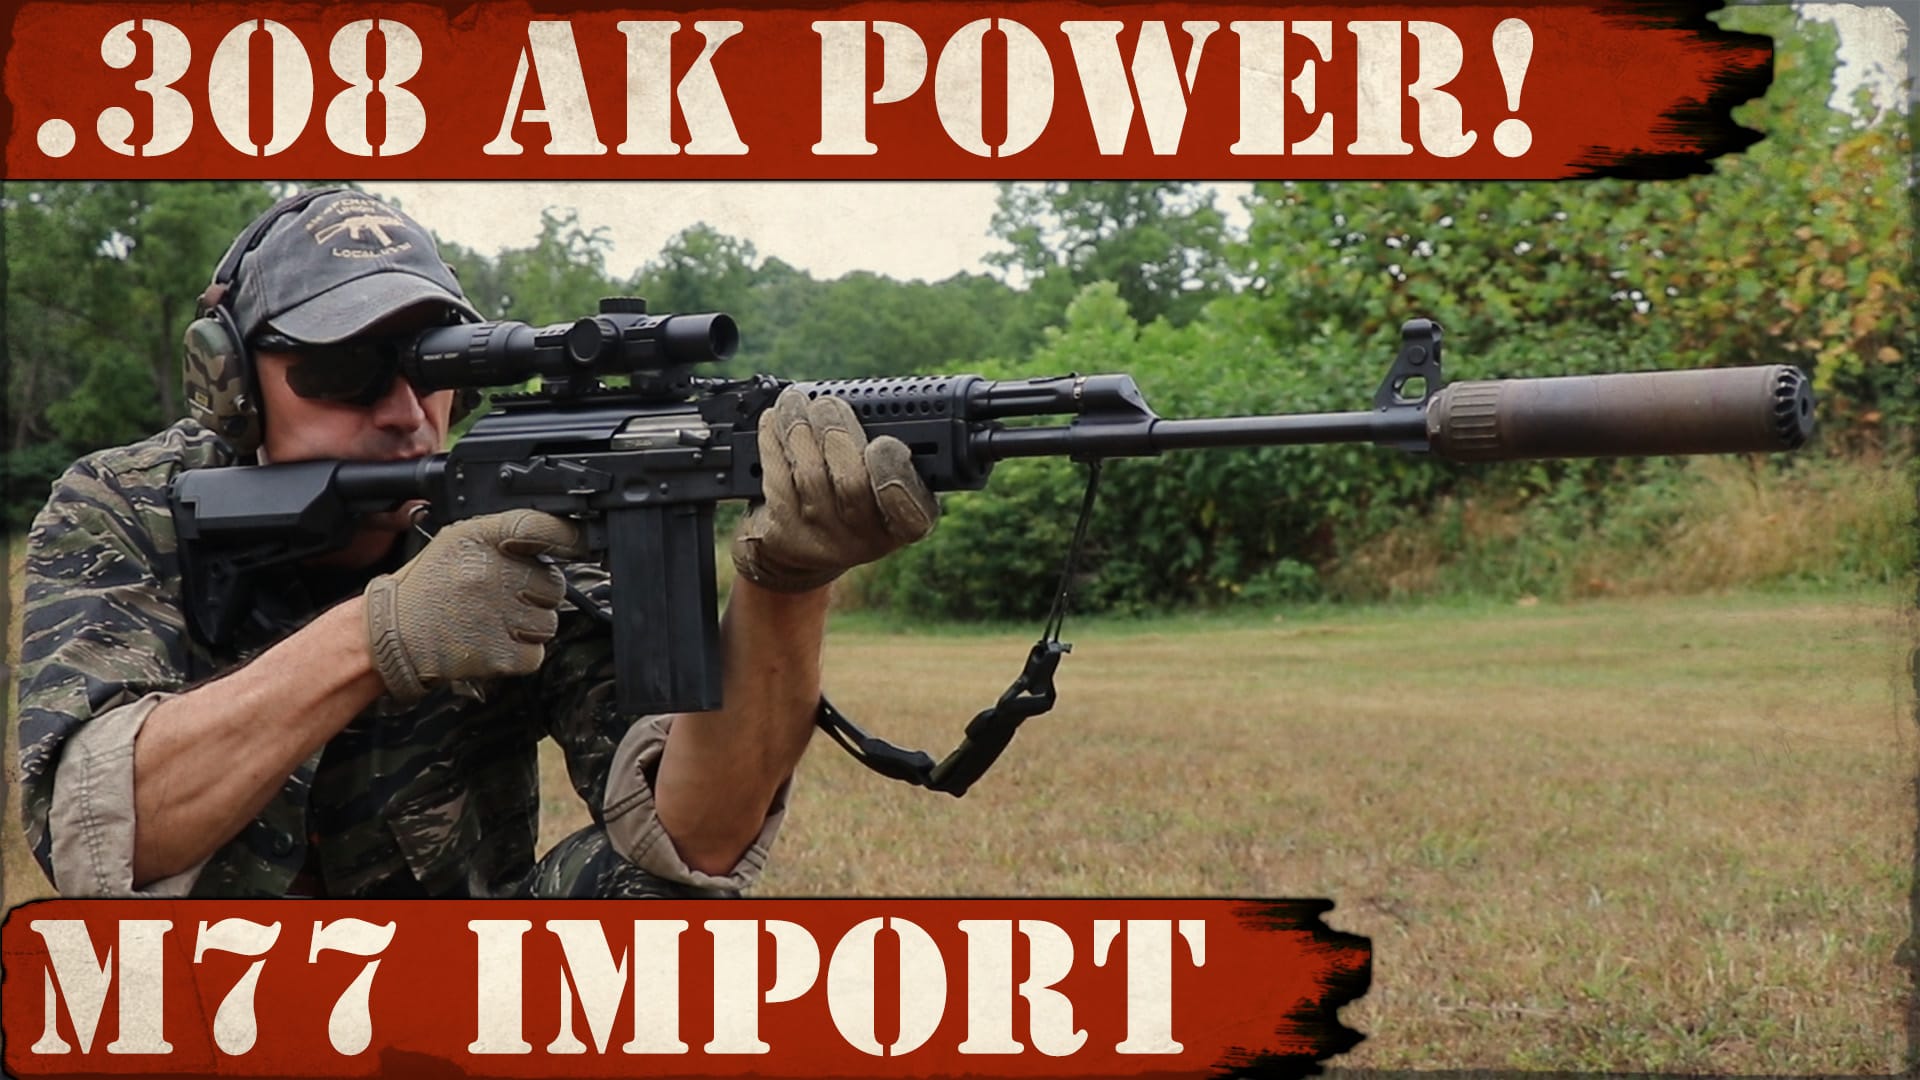 .308 AK Power – M77 Affordable import from Zastava!